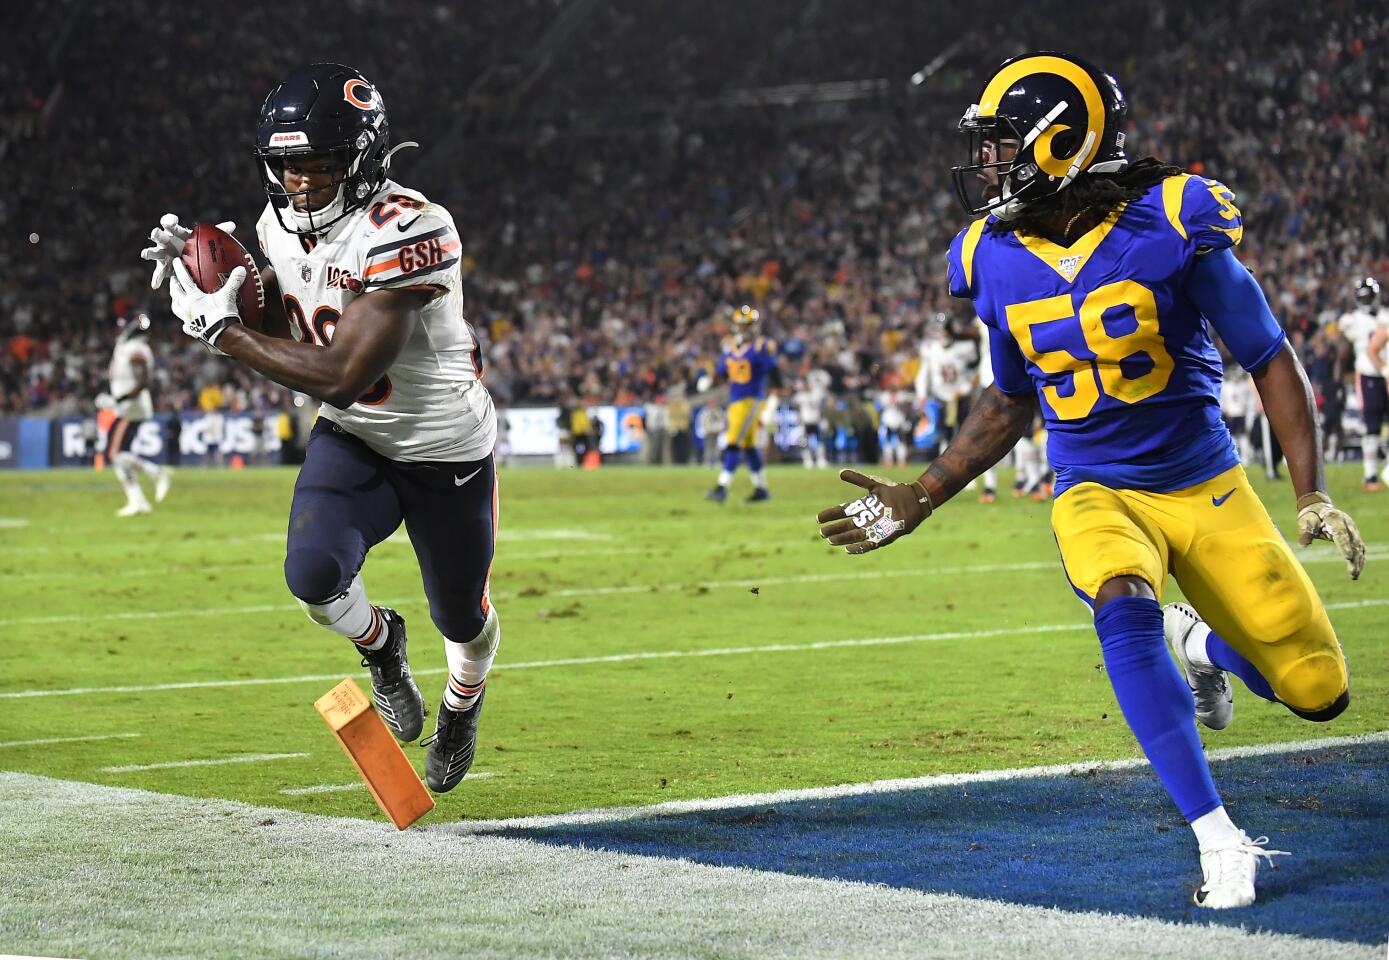 Bears wide receiver Kyle Fuller scores a touchdown in front of Rams linebacker Cory Littleton.